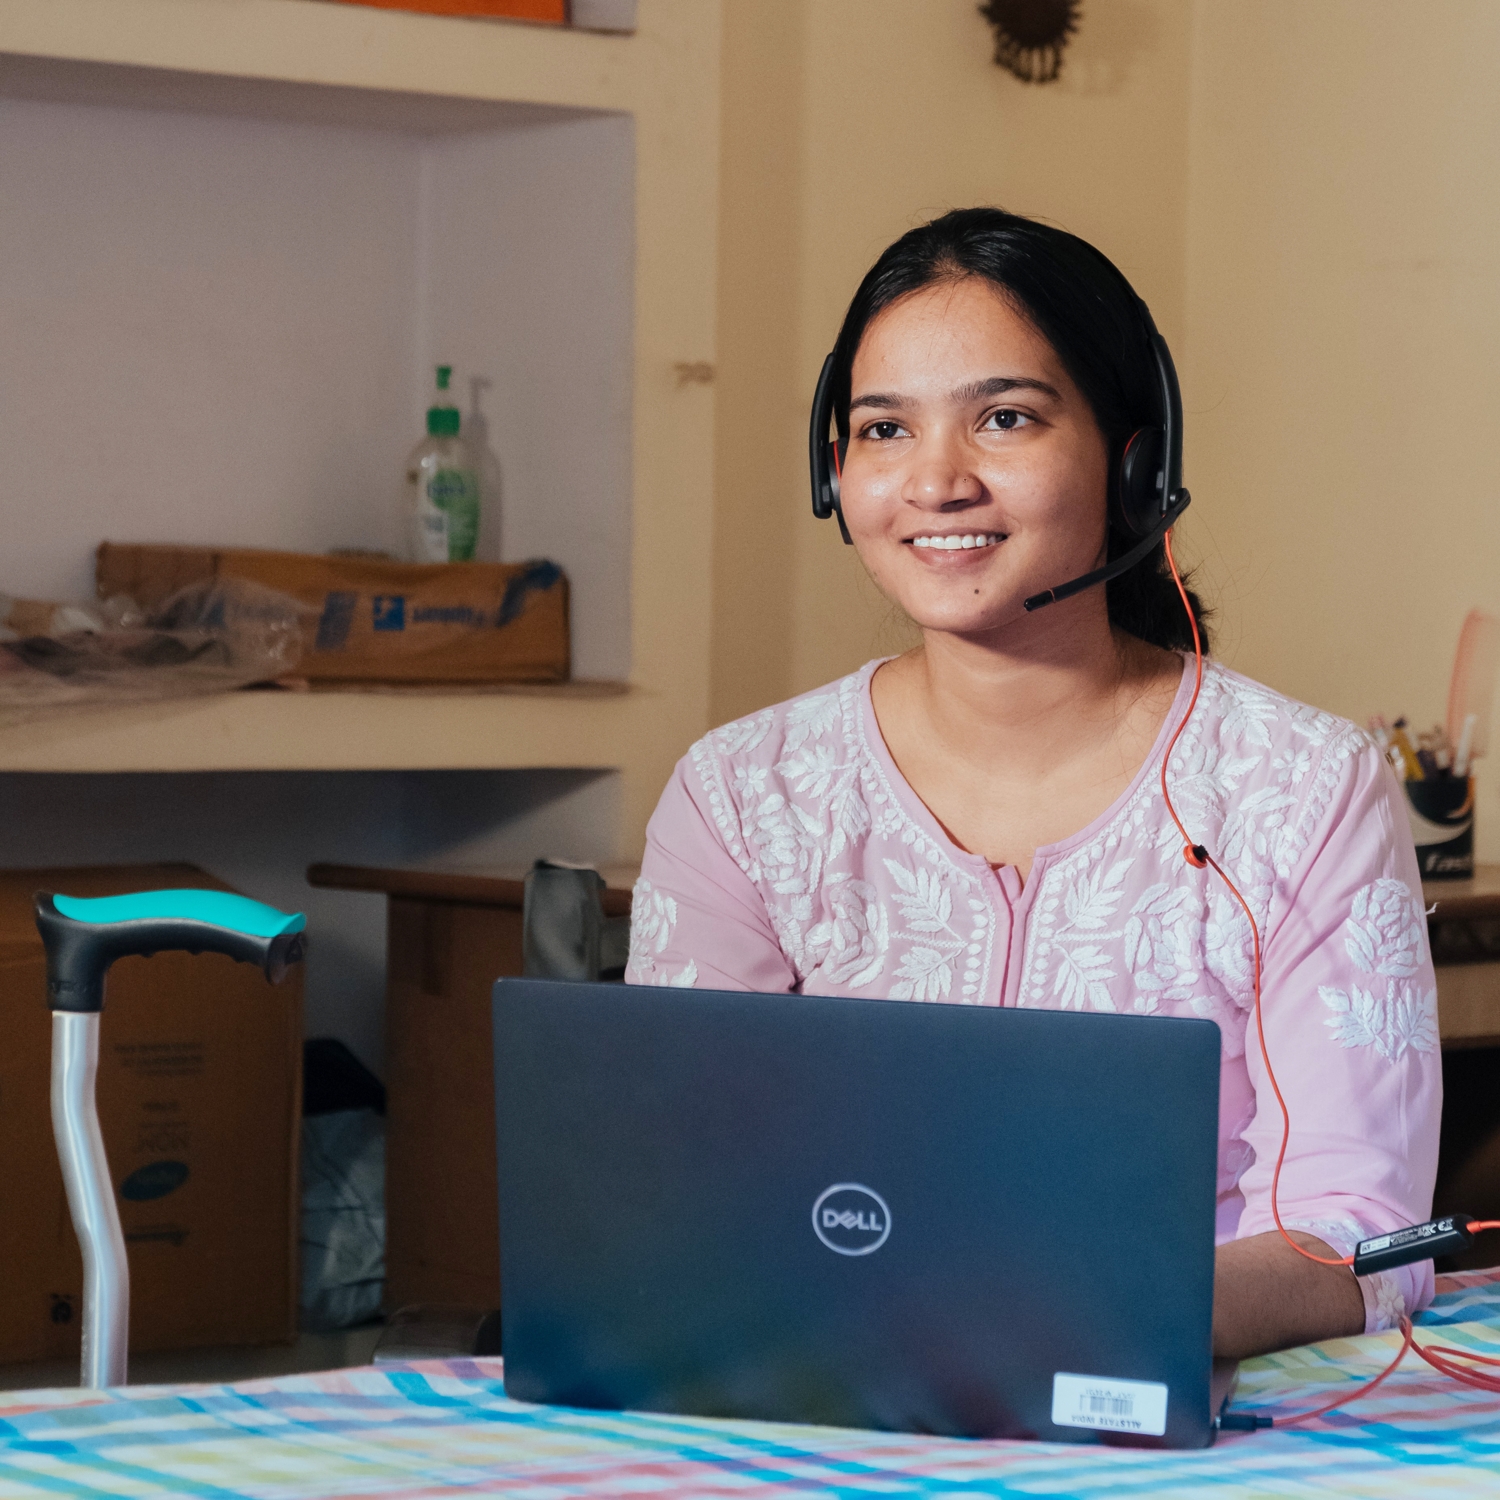 Photo of a woman smiling while working on a laptop